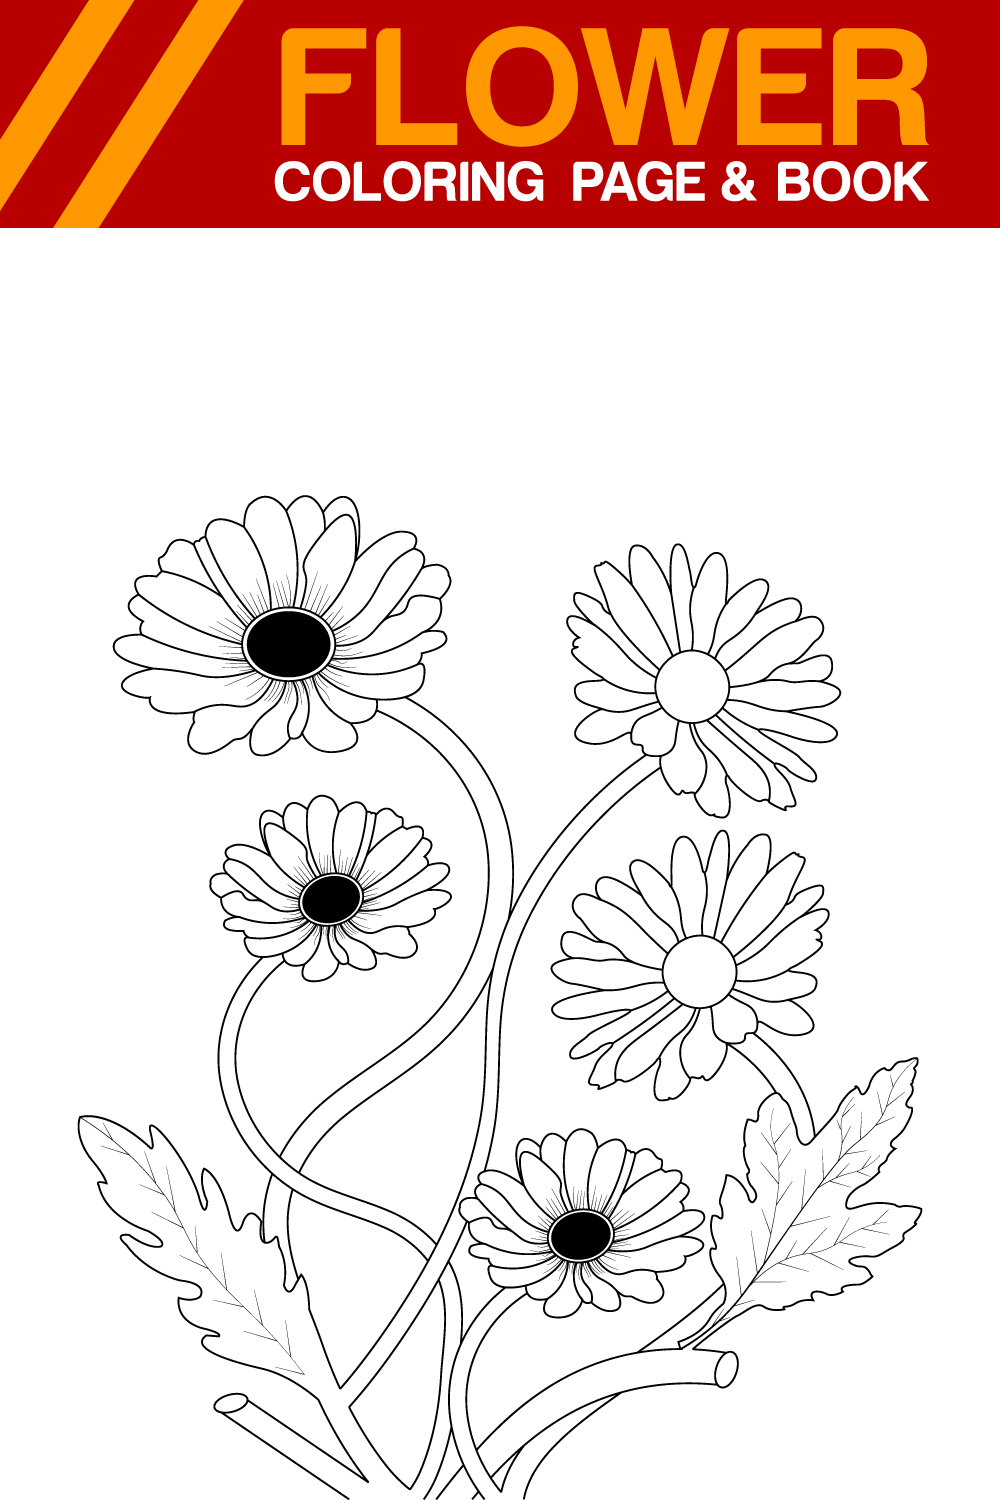 Daisy Flower Coloring Page For Adults pinterest preview image.